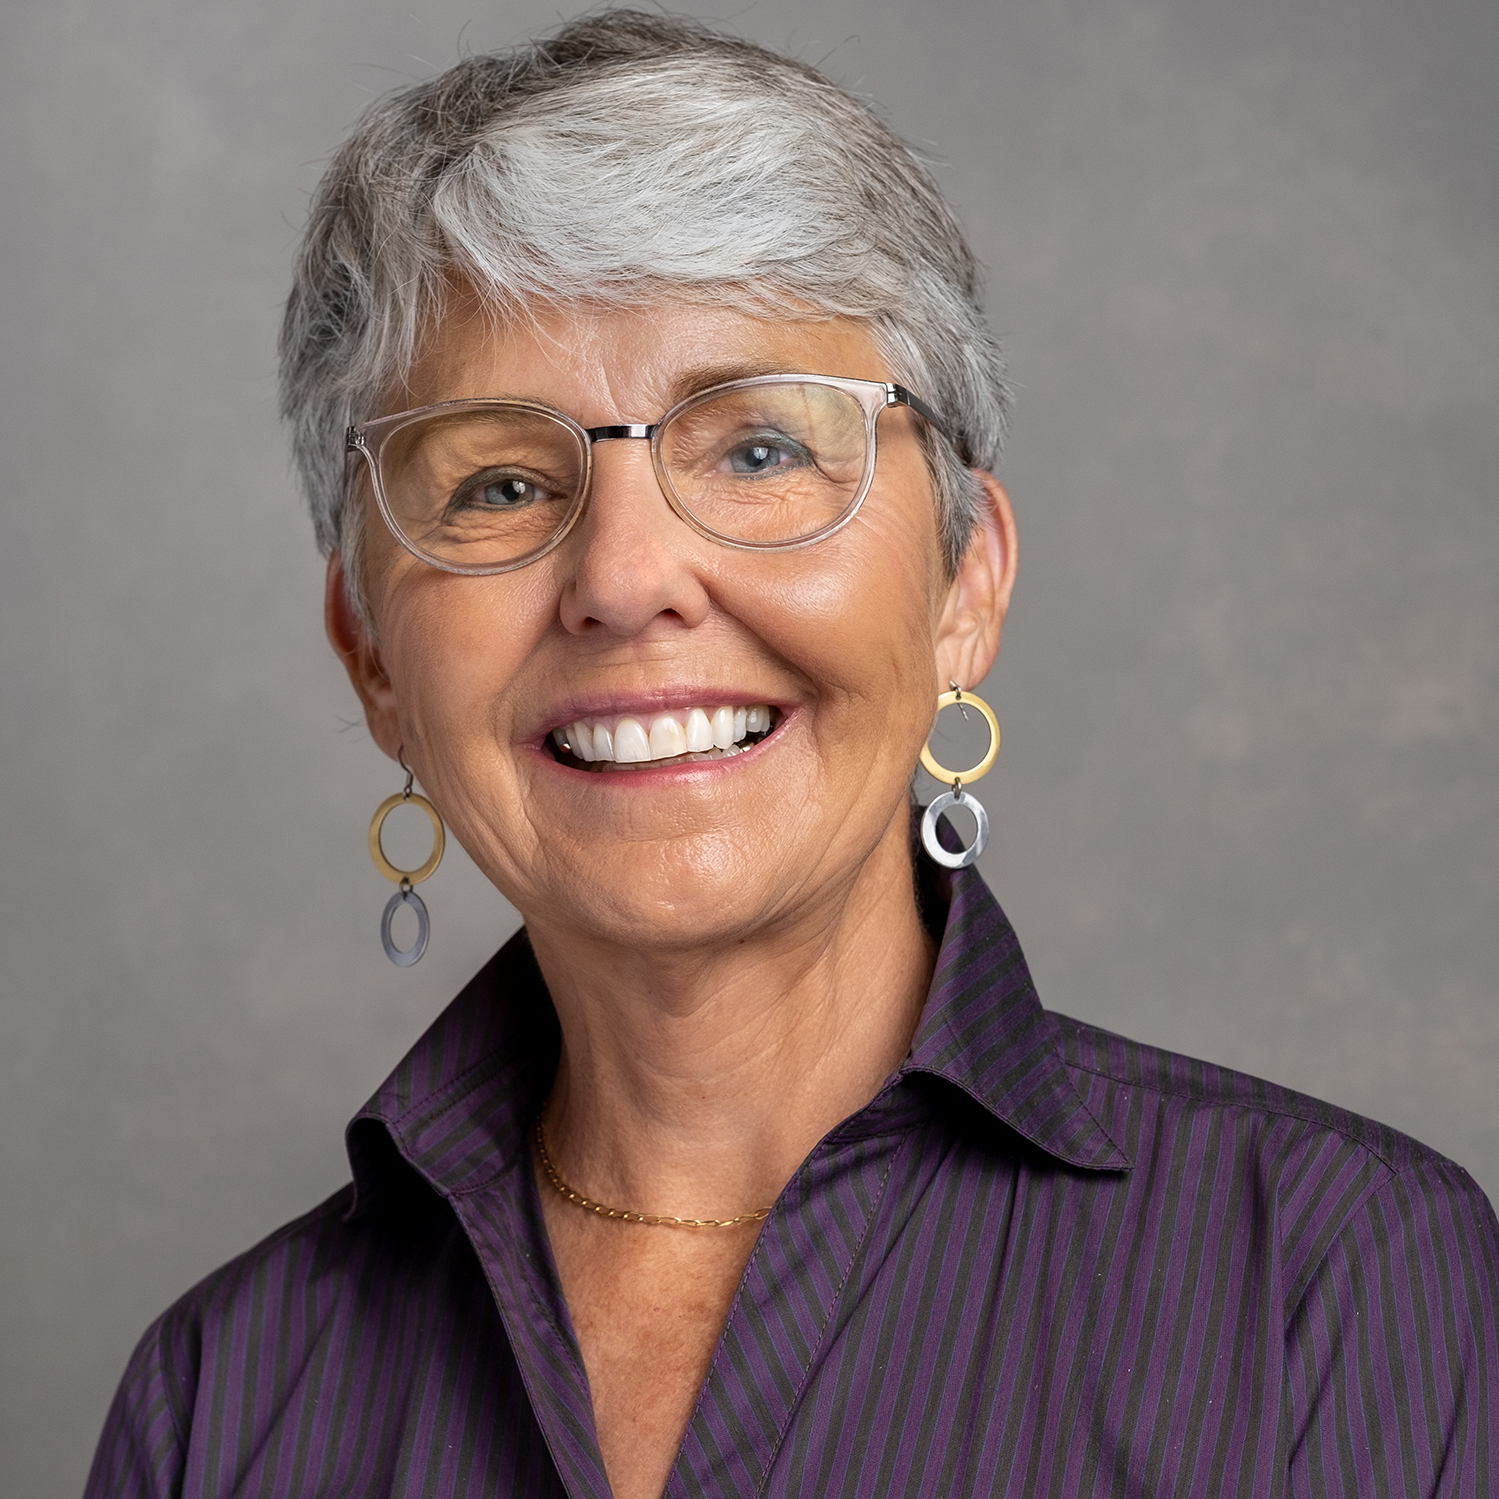 Kim Martin wearing a purple shirt, gold and silver hoop earrings, and smiling in front of a grey backdrop.